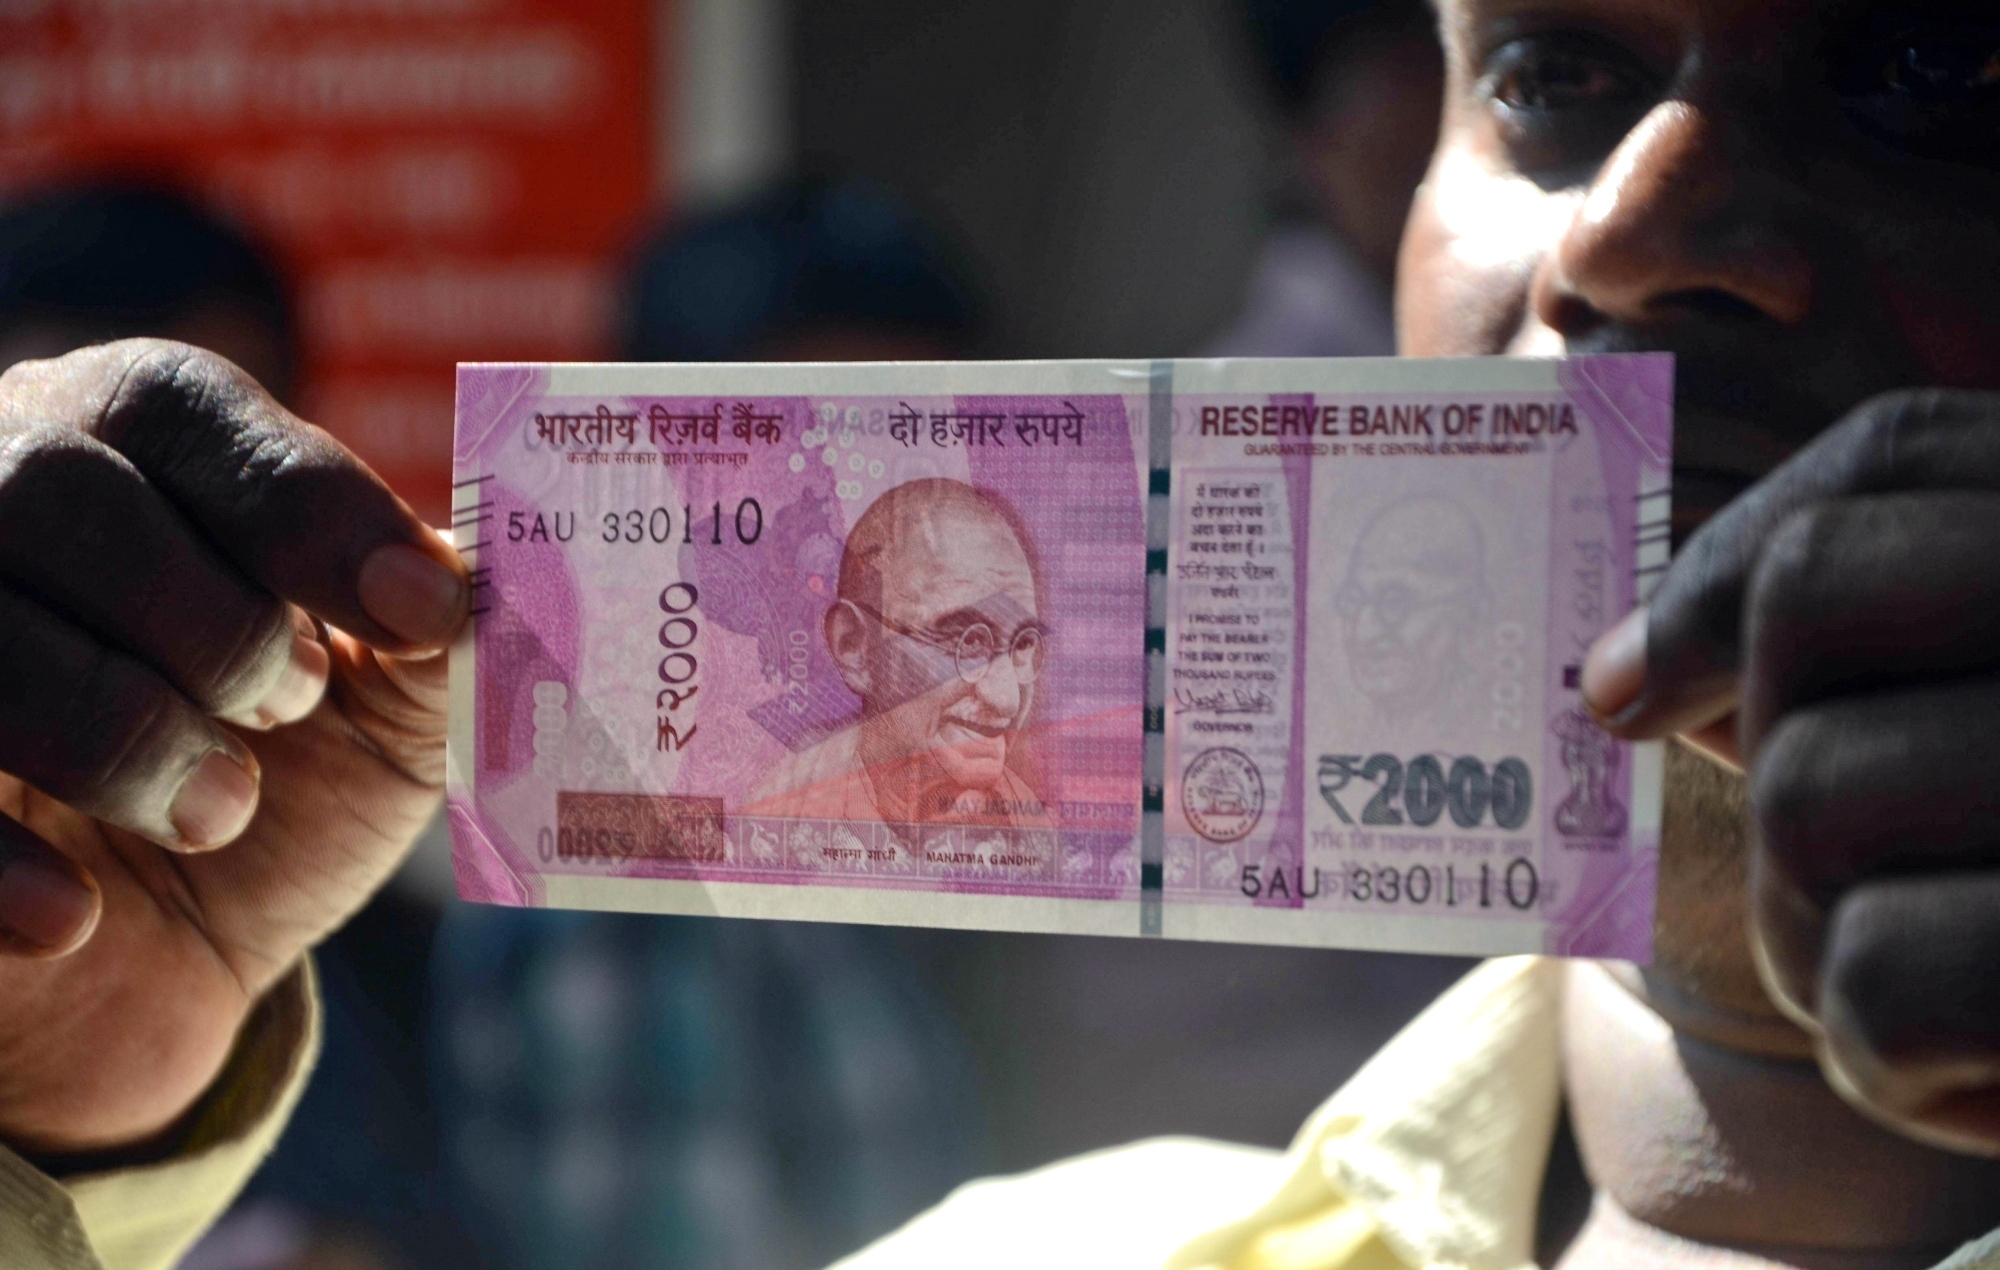  Pil In Delhi Hc Against Rbi, Sbi Permitting Rs 2k Note Exchange Without Identity-TeluguStop.com